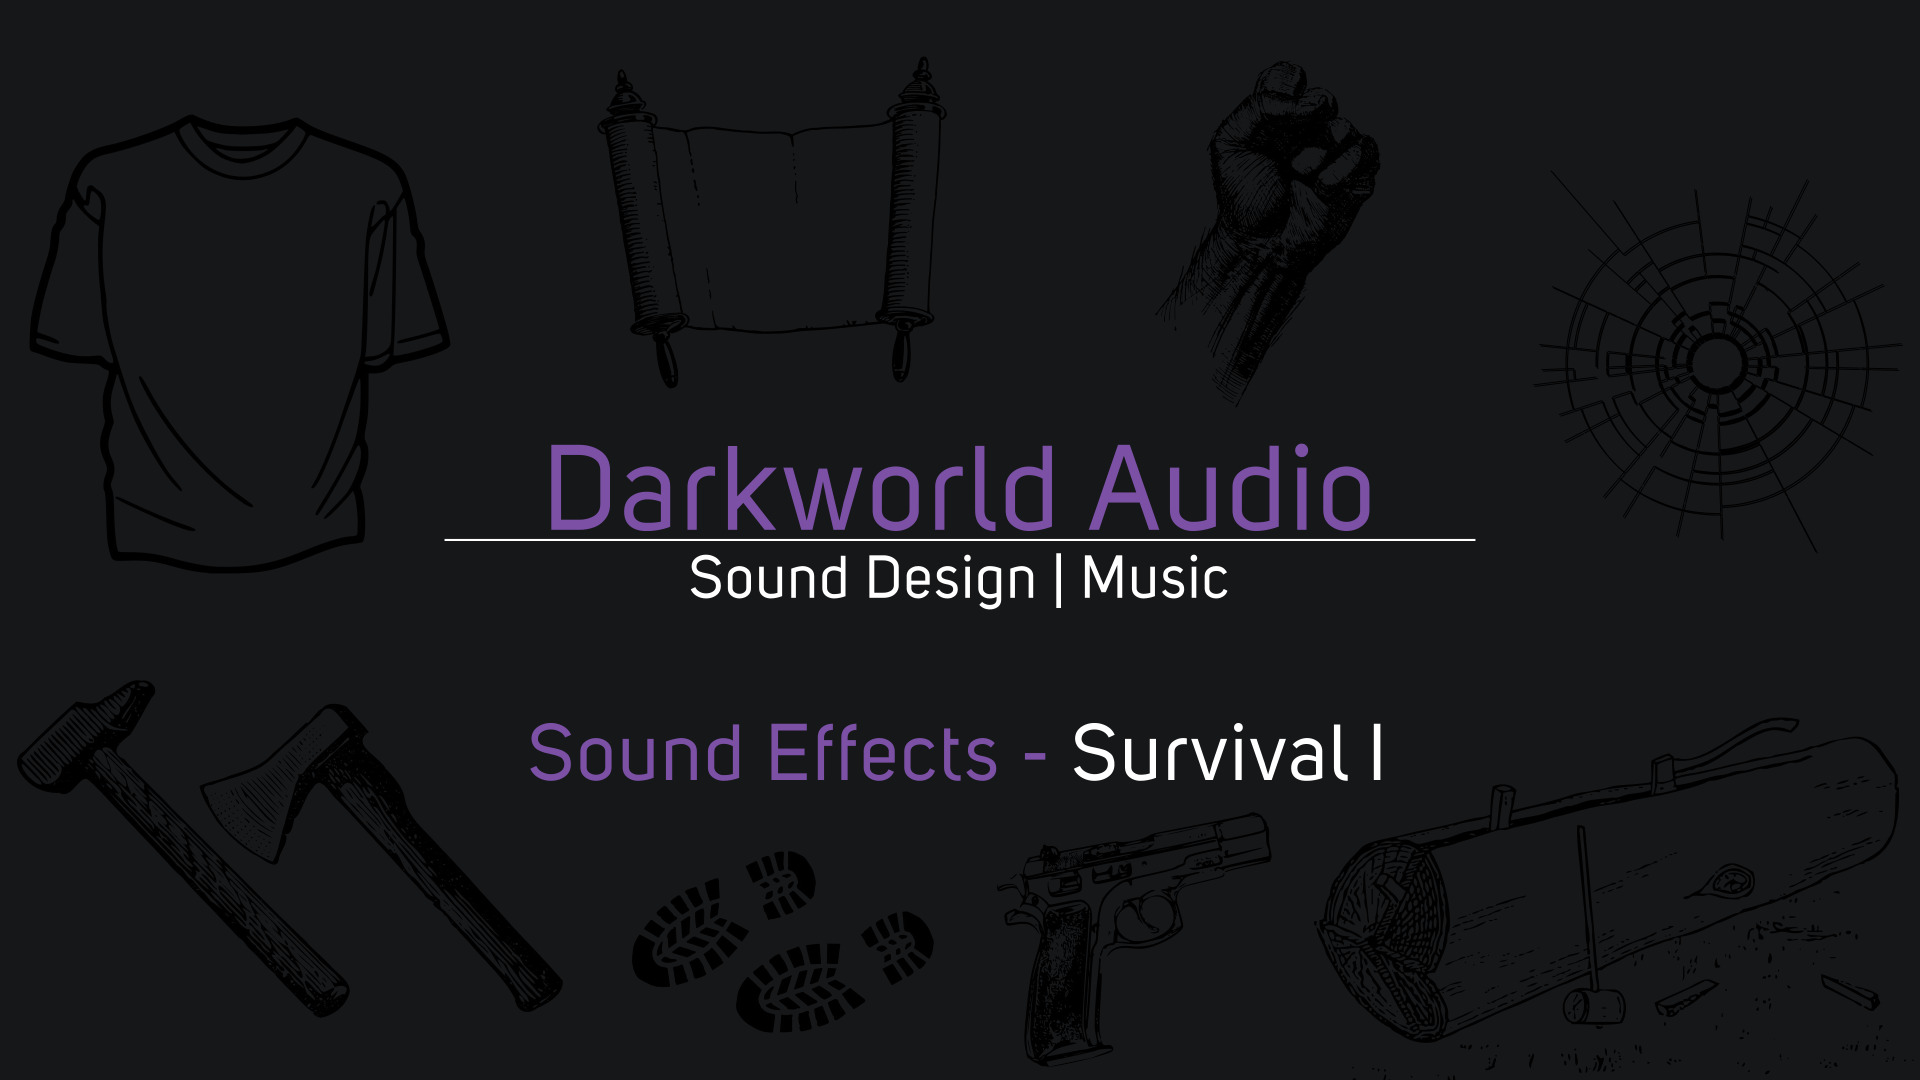 Sound Effects - Survival I